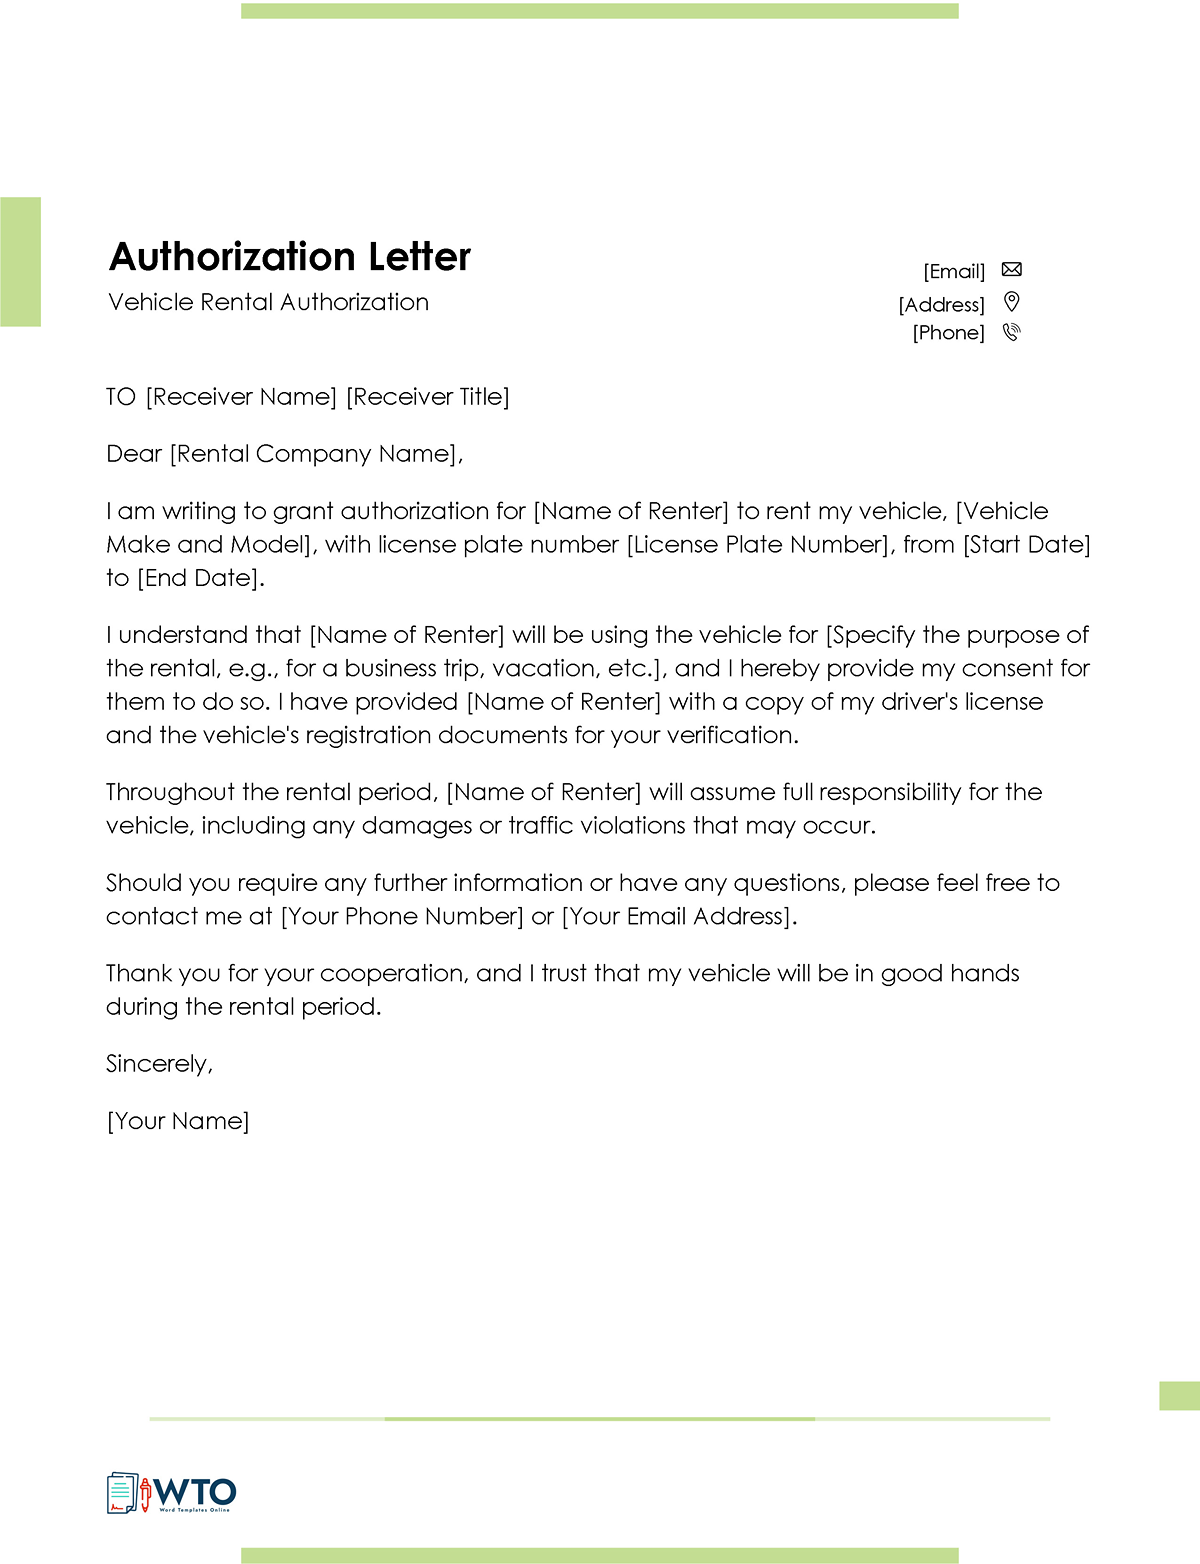 Vehicle Authorization Letter Template-Downloadable word format